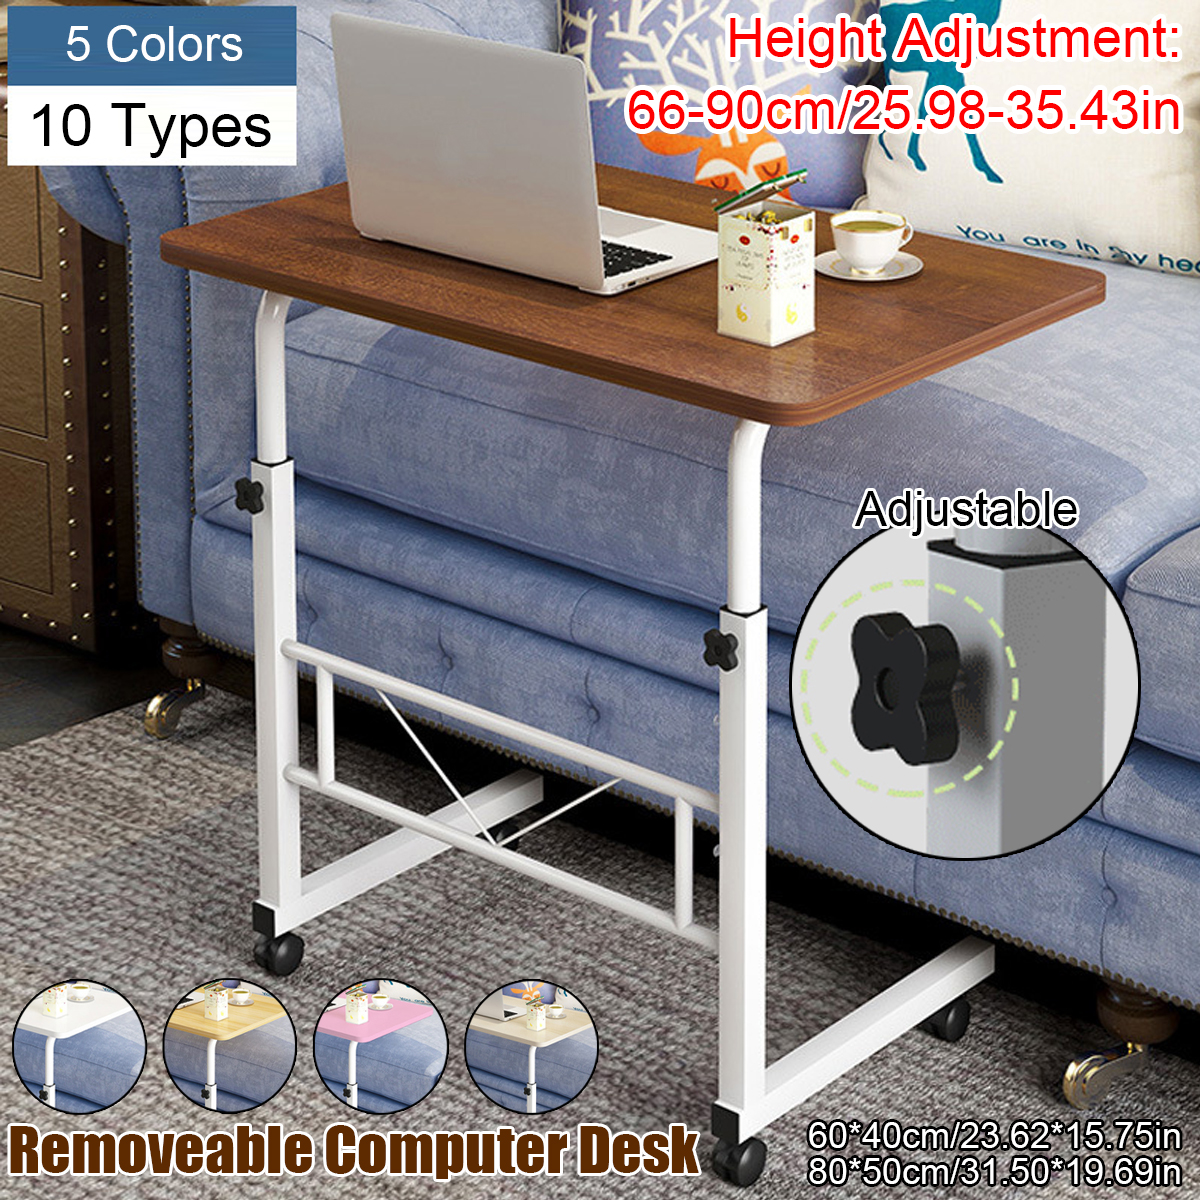 Removable-Laptop-Table-Lifting-Desk-Tabletop-Food-Tray-Bedside-Table-Bed-Sofa-Stand-with-Wheel-1754628-1